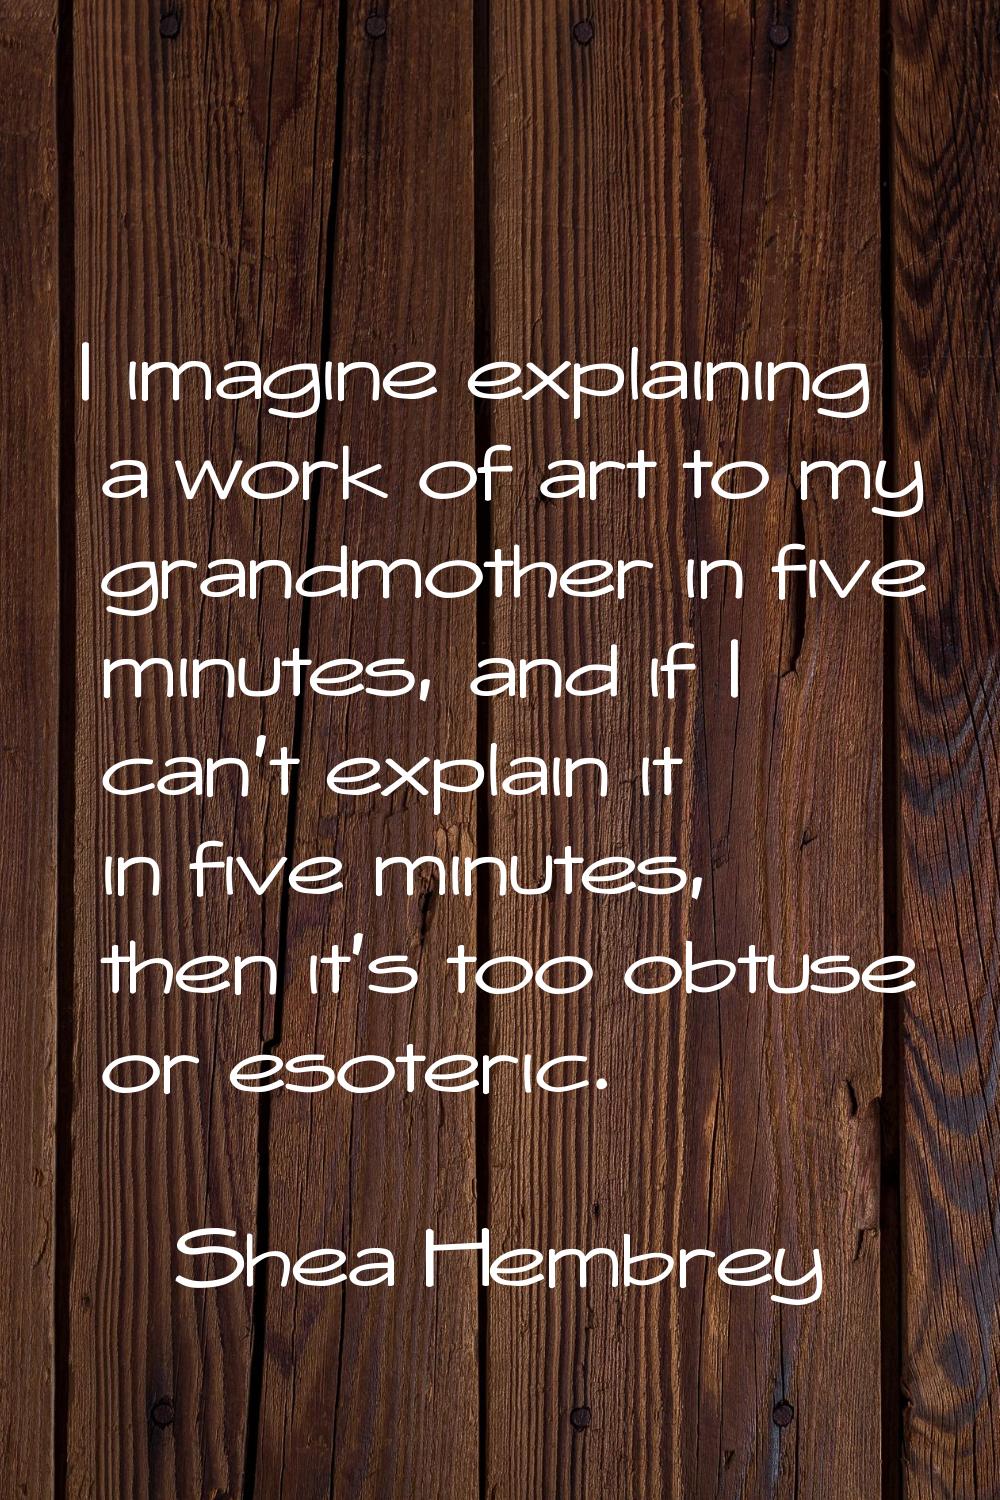 I imagine explaining a work of art to my grandmother in five minutes, and if I can't explain it in 